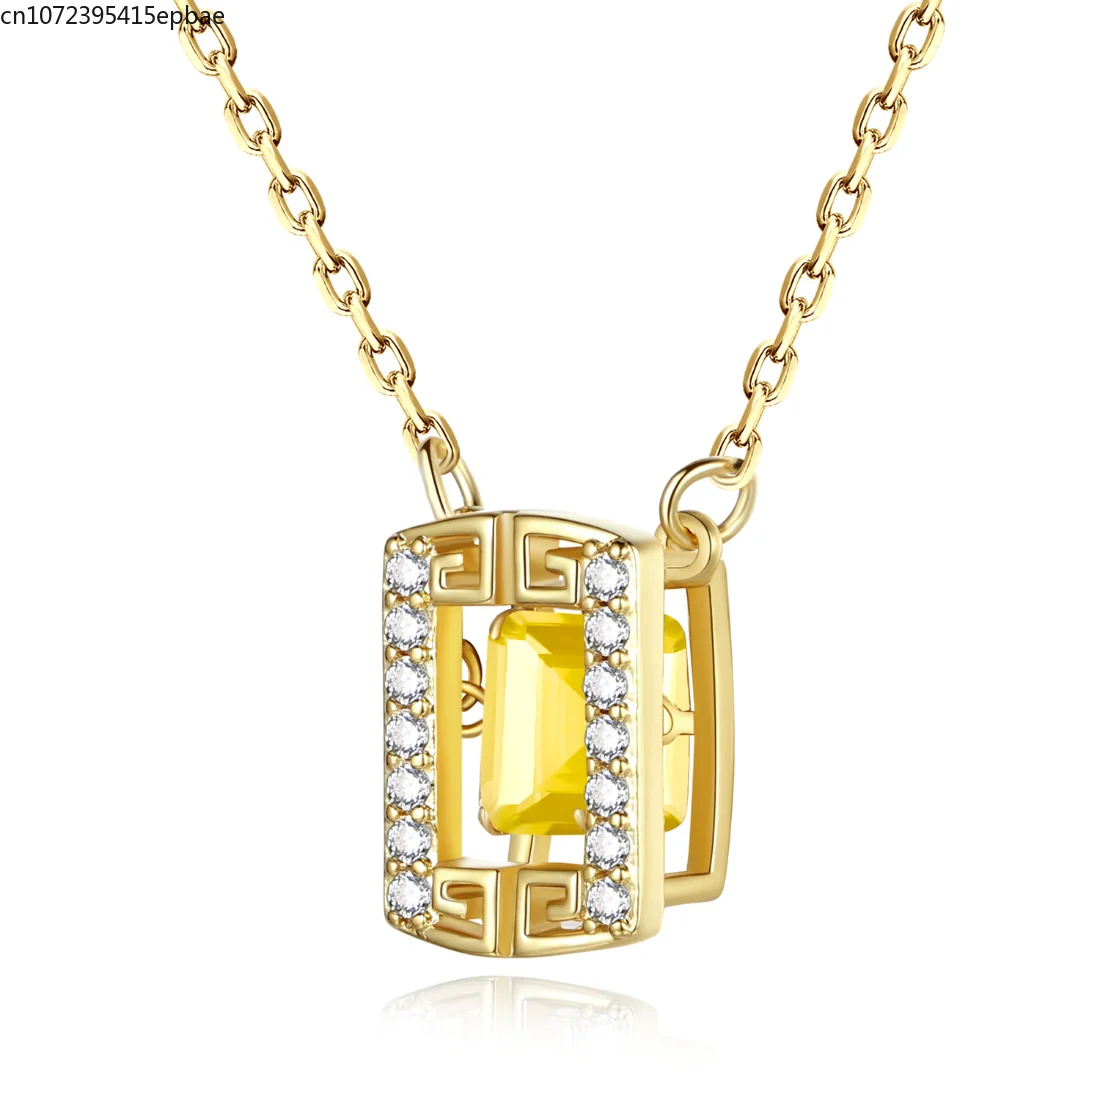 

SACKART Never Fades Palace Rectangular Smart Necklace Beating Heart Pendant Female Clavicle Chain Cubic Zirconia Luxury Jewelry